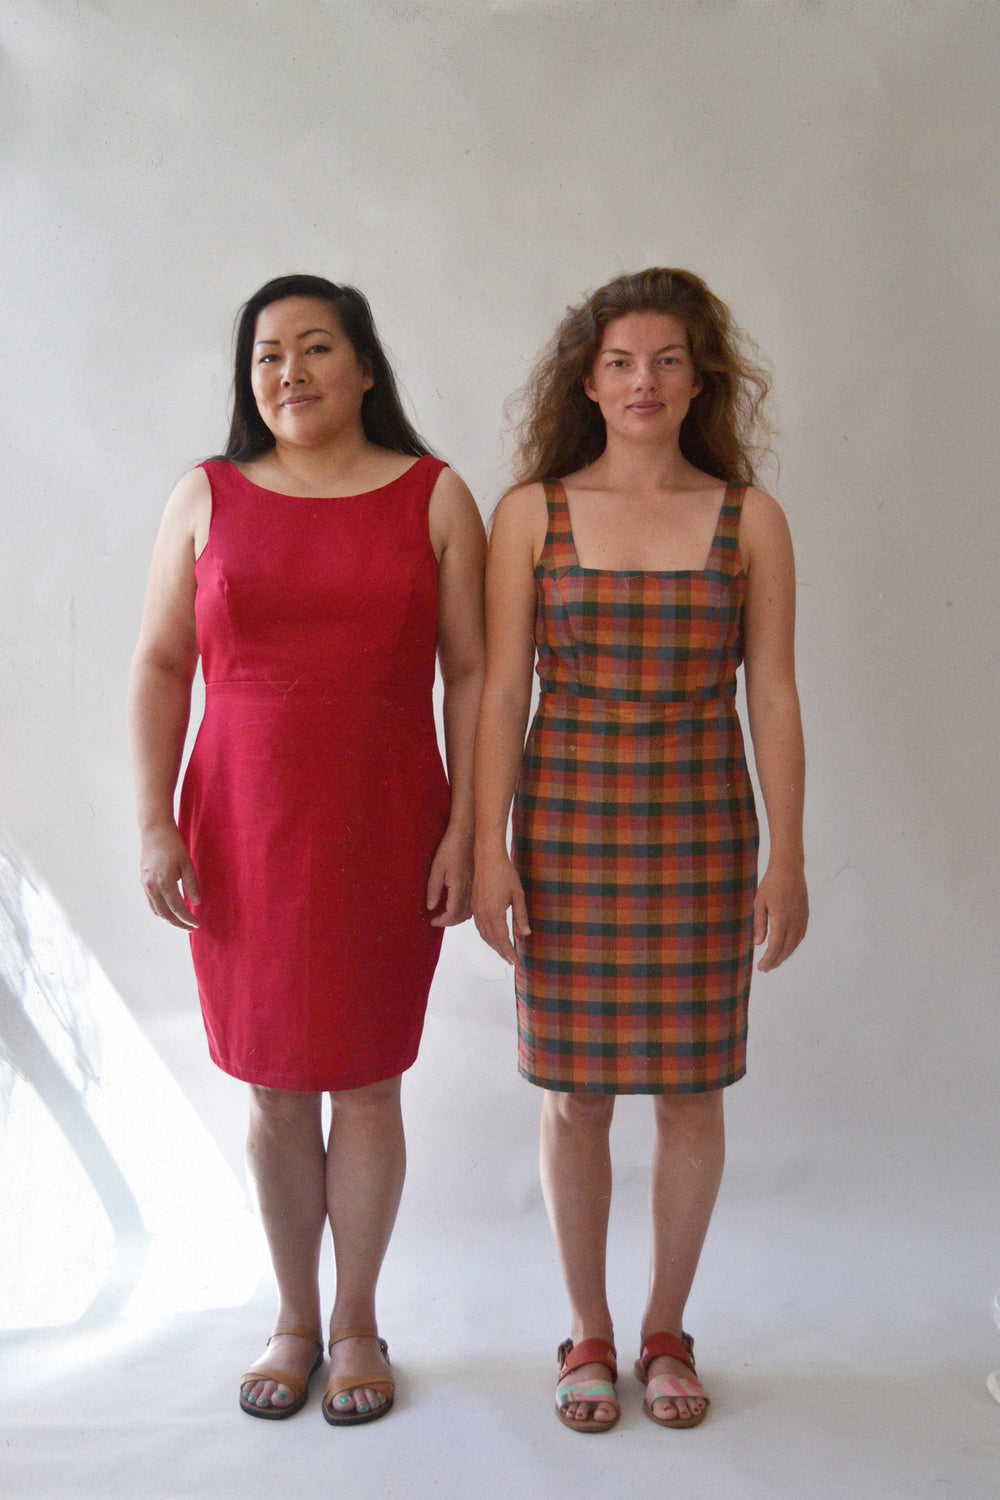 Women wearing the Delilah Dress sewing pattern from Made My Wardrobe on The Fold Line. A dress pattern made in cotton, linen or light denim fabrics, featuring a fitted silhouette, low square or round neck, deep V or X back, back zip closure, sleeveless an